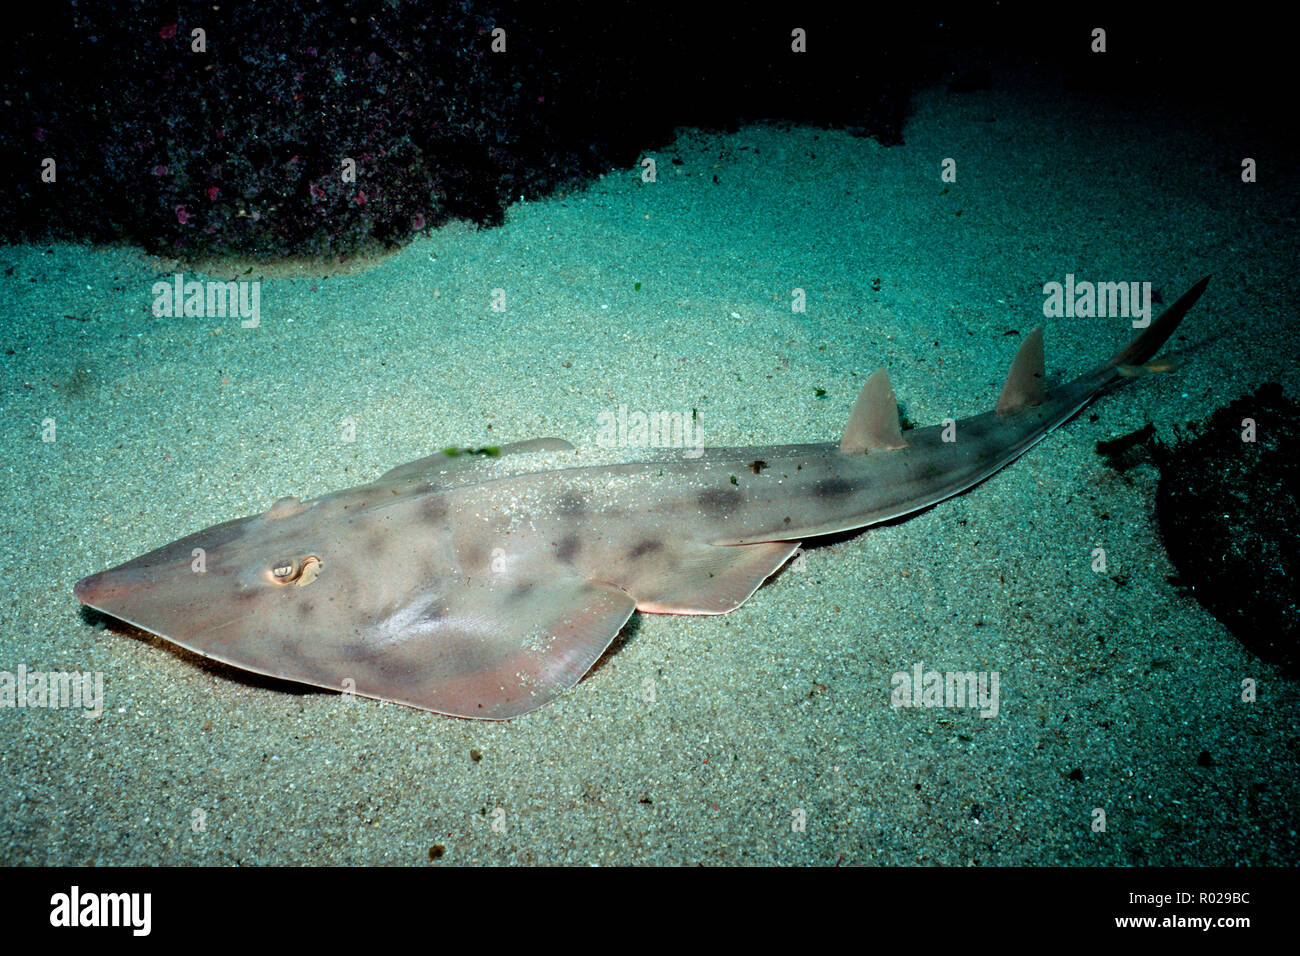 Shovelnose guitarfish, Rhinobatus productus, is found in the Eastern Pacific, where it feeds on clams, worms and crabs in the sand, California, Pacifi Stock Photo